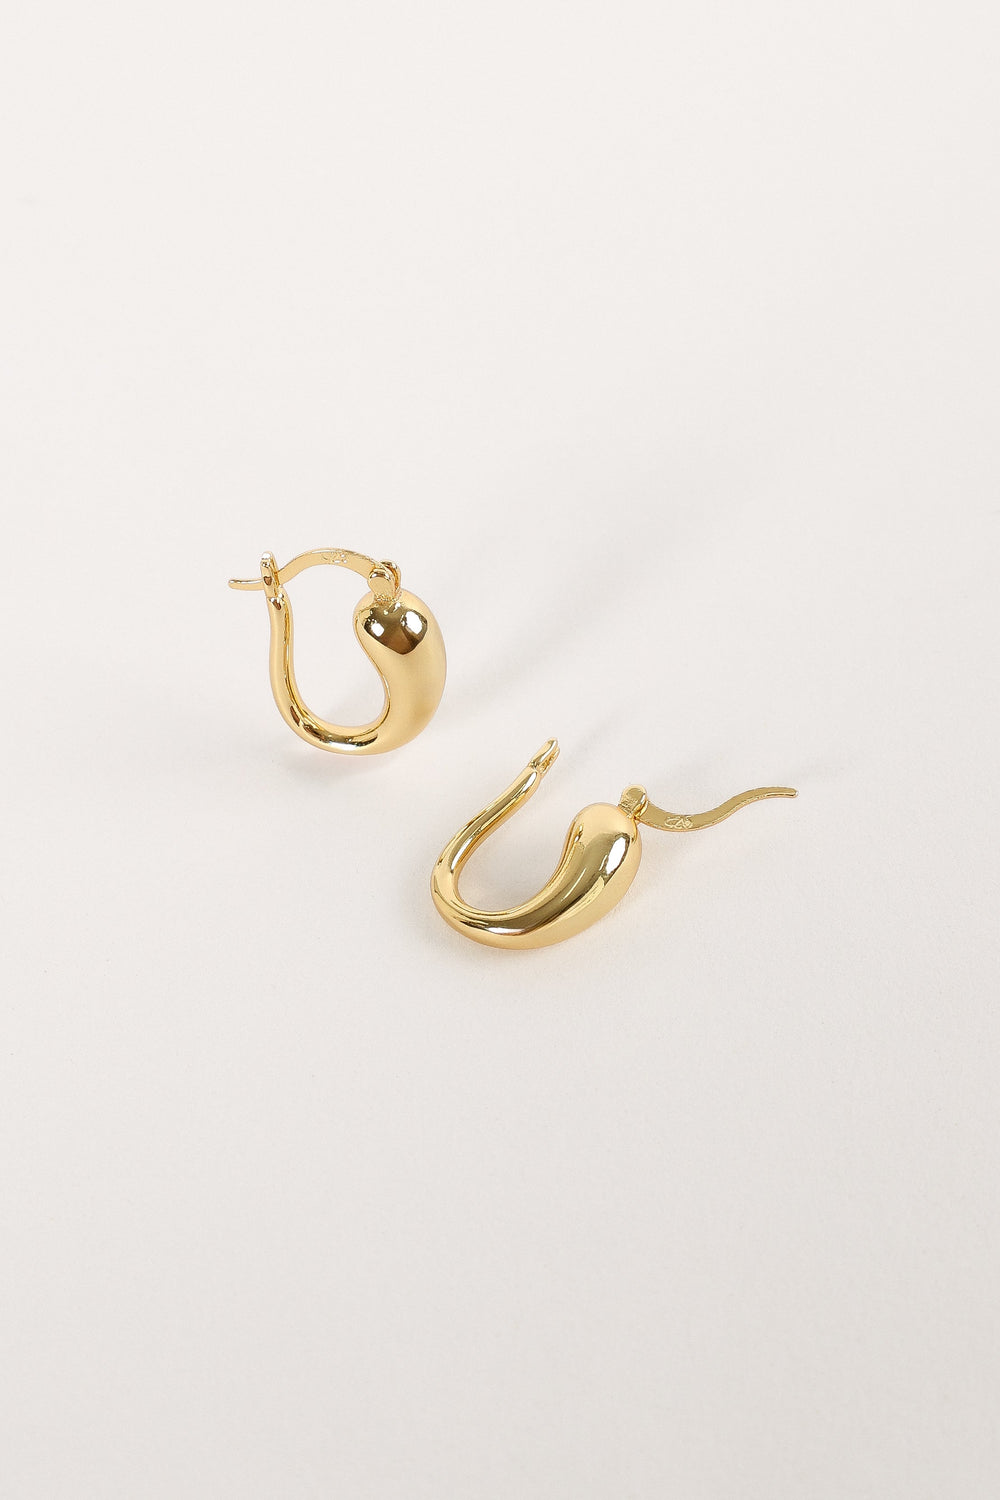 Petal and Pup USA ACCESSORIES Kristen Earrings - Gold One Size